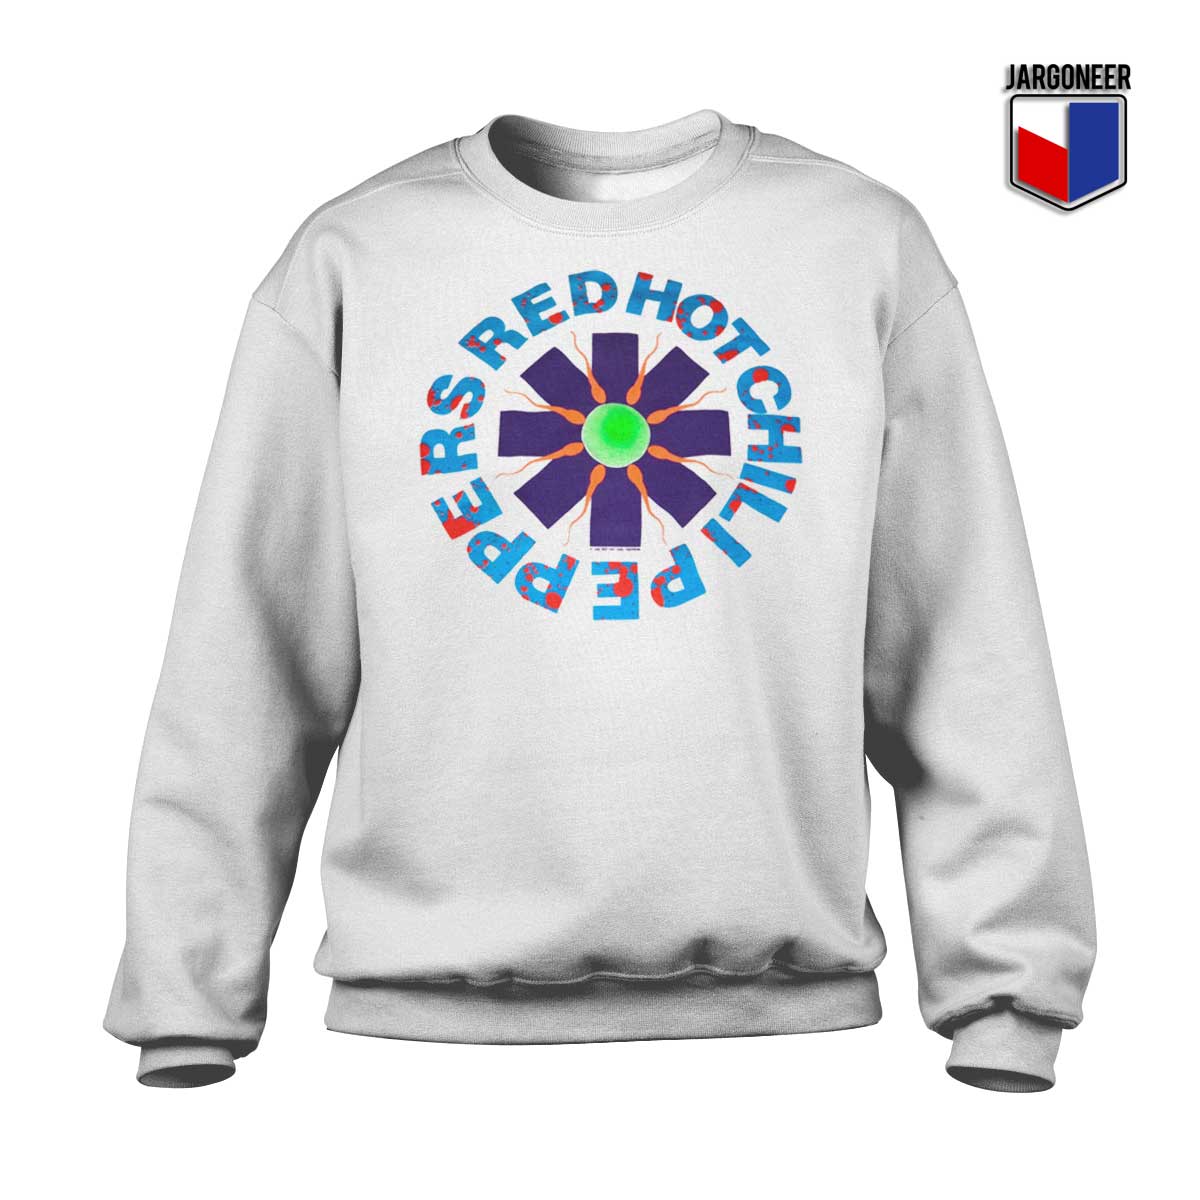 Red hot Chili Peppers Sweatshirt - Shop Unique Graphic Cool Shirt Designs